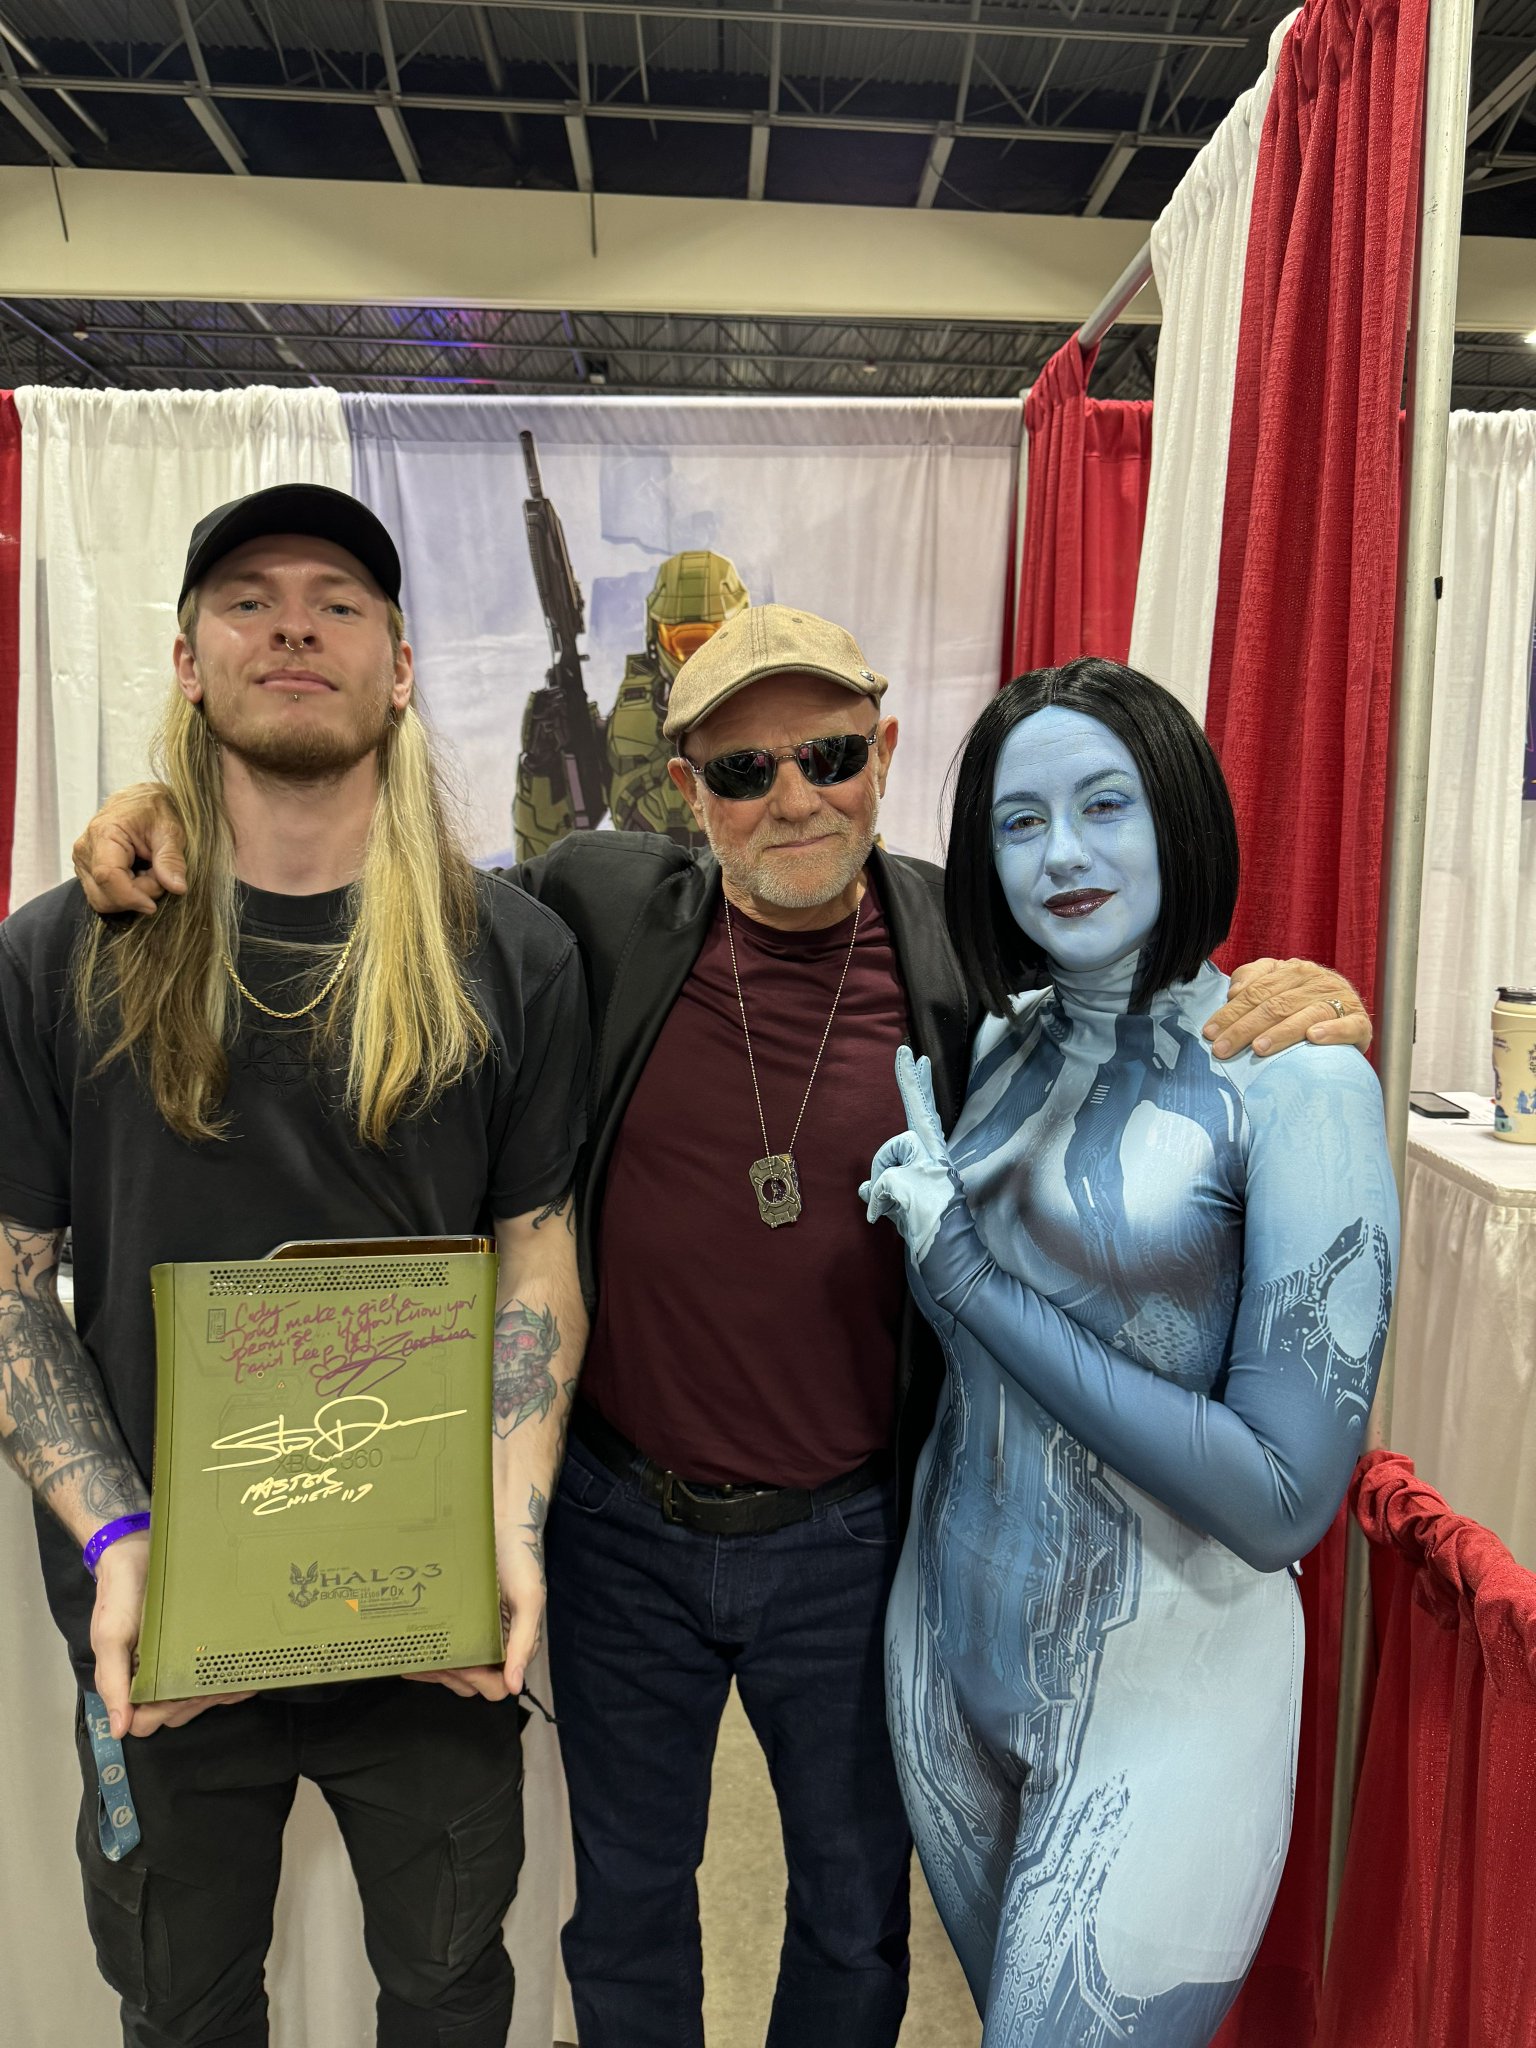 Photo of LaSinity cosplaying as Cortana with her partner "Womp" and Steve Downes